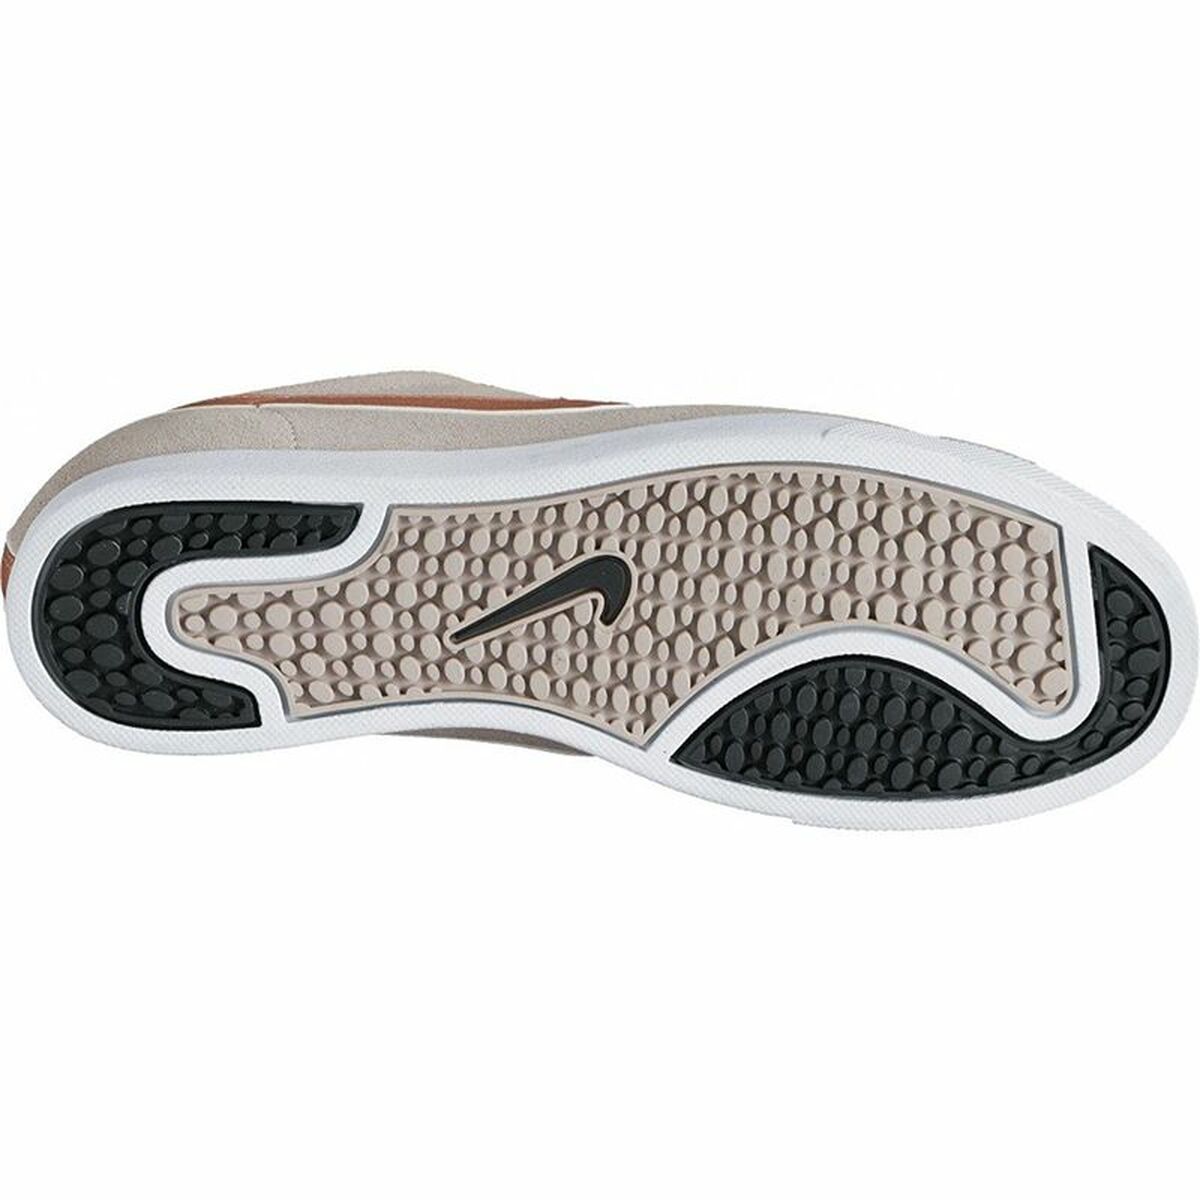 Women's casual trainers Nike Racquette Copper Brown